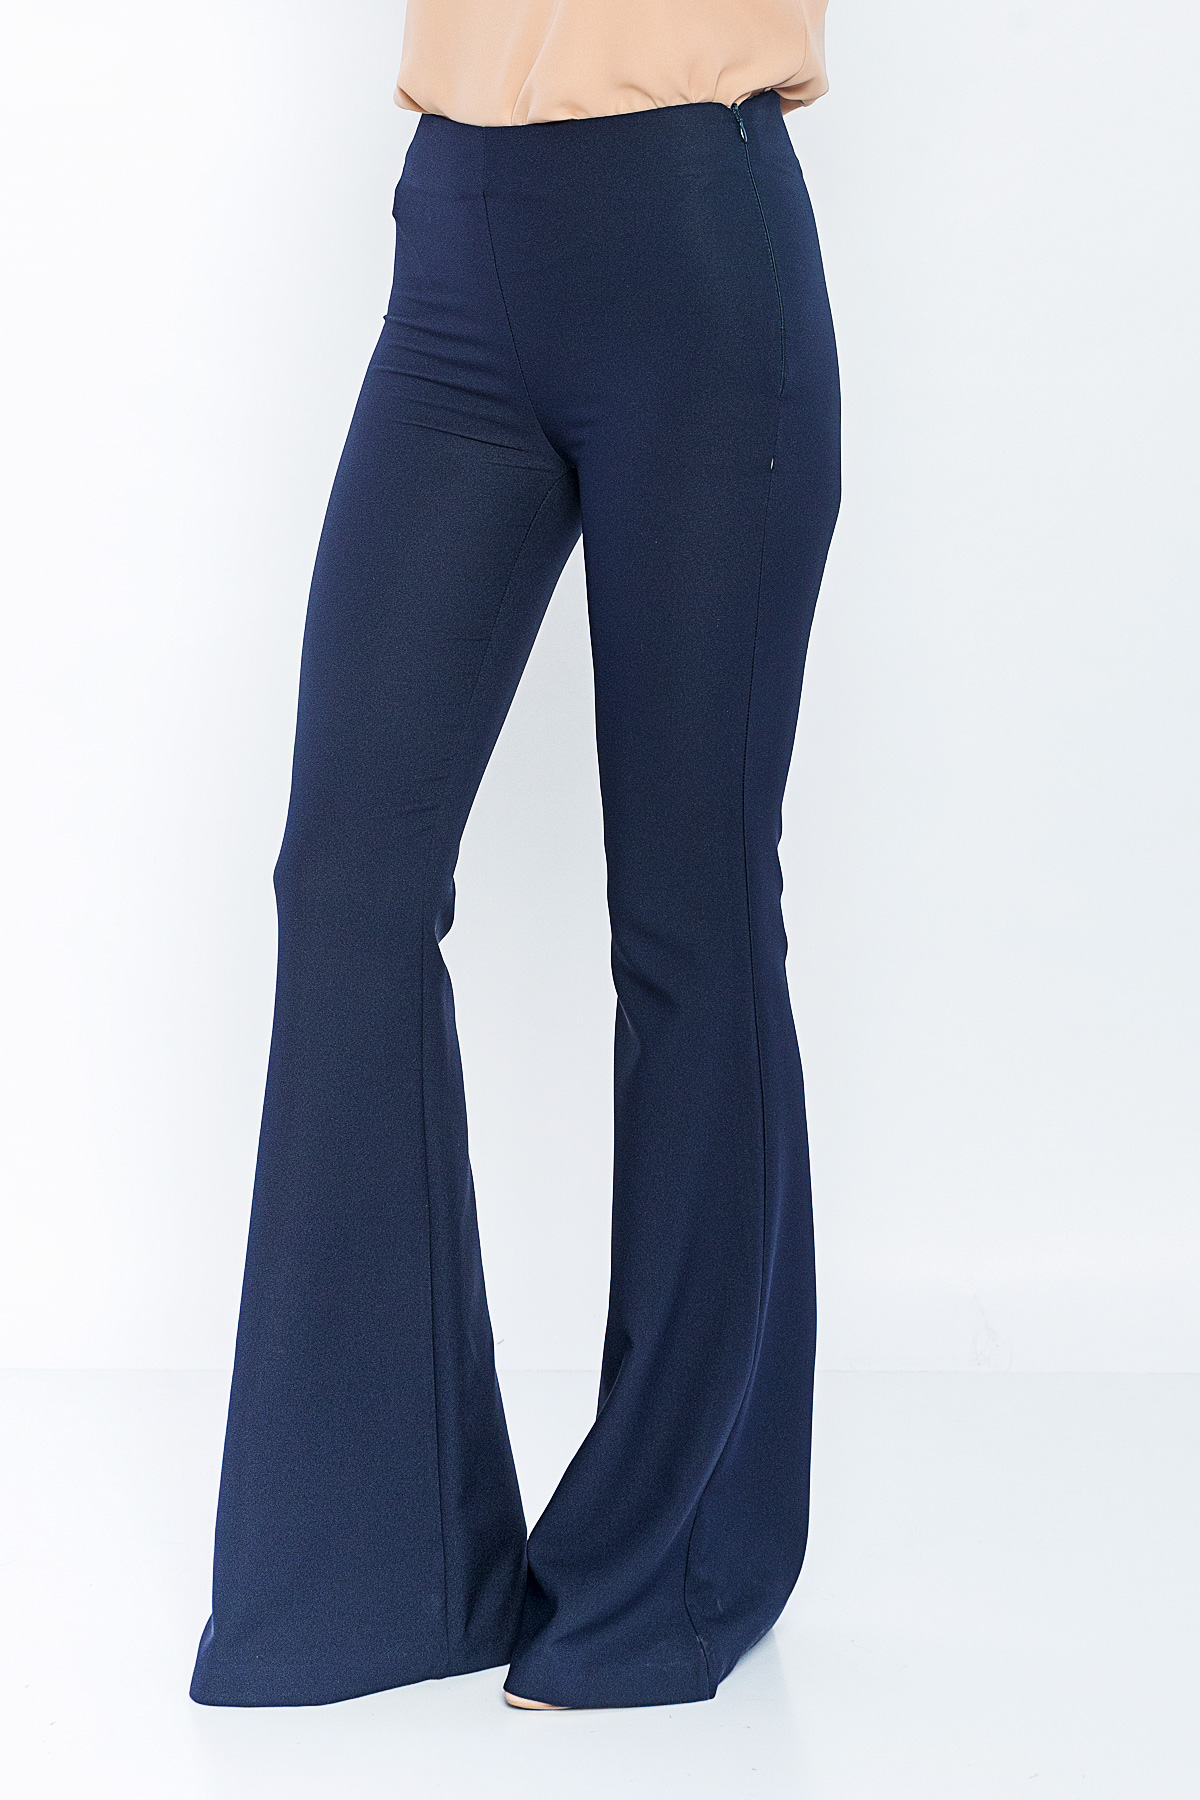 Picture of Woman Navy Navy Blue High Waist Classical Flare Trotter Trousers